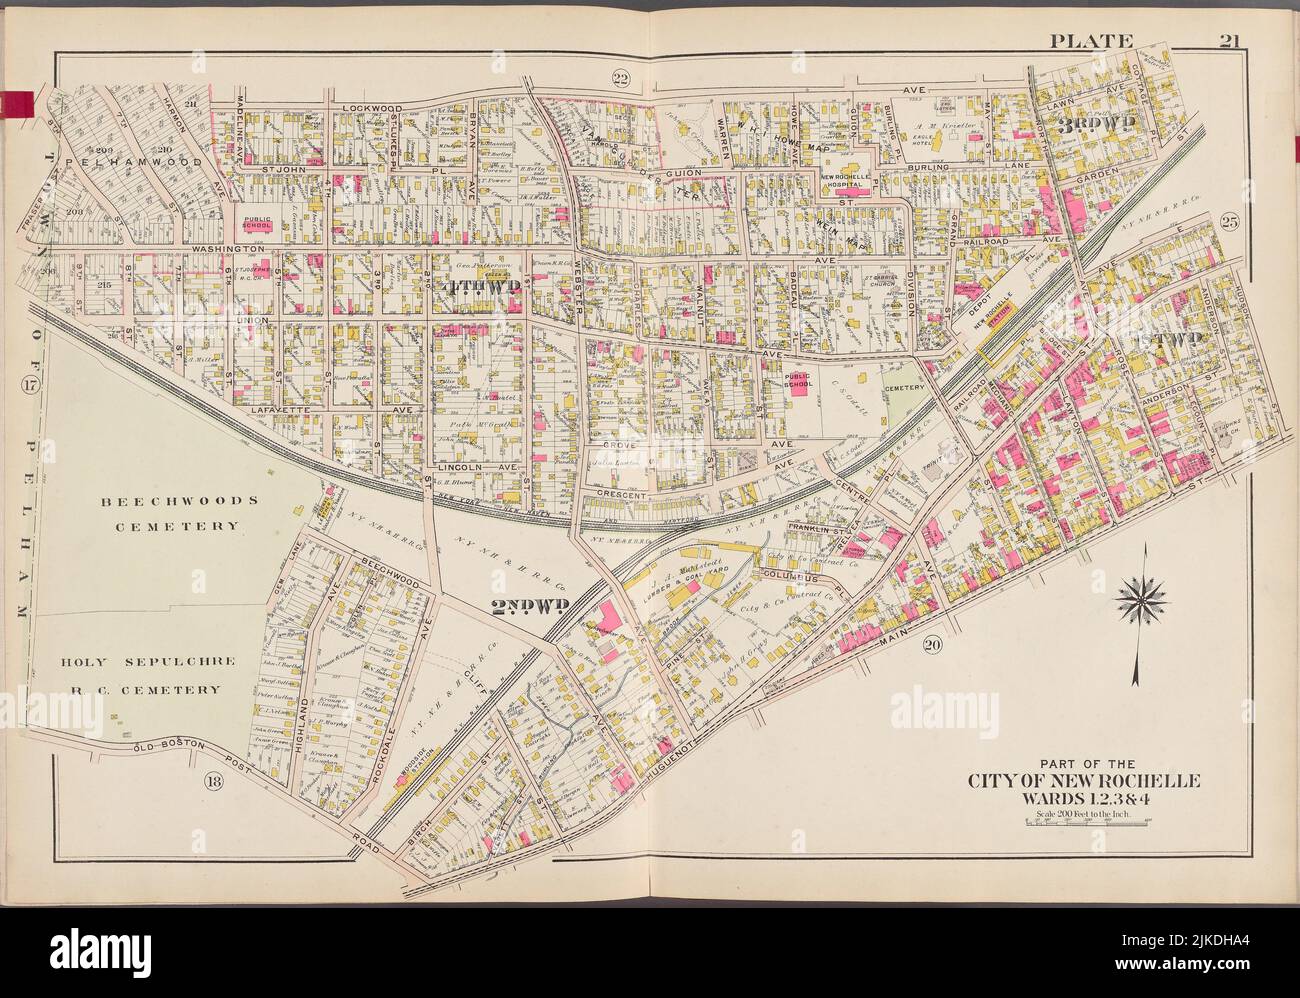 Westchester, V. 1, Double Page Plate No. 21 [Mappa delimitata da Lockwood Ave., Hudson St., Huguenot Main St., Old Boston Post Rd., Town of Pelham]. G.W. Foto Stock